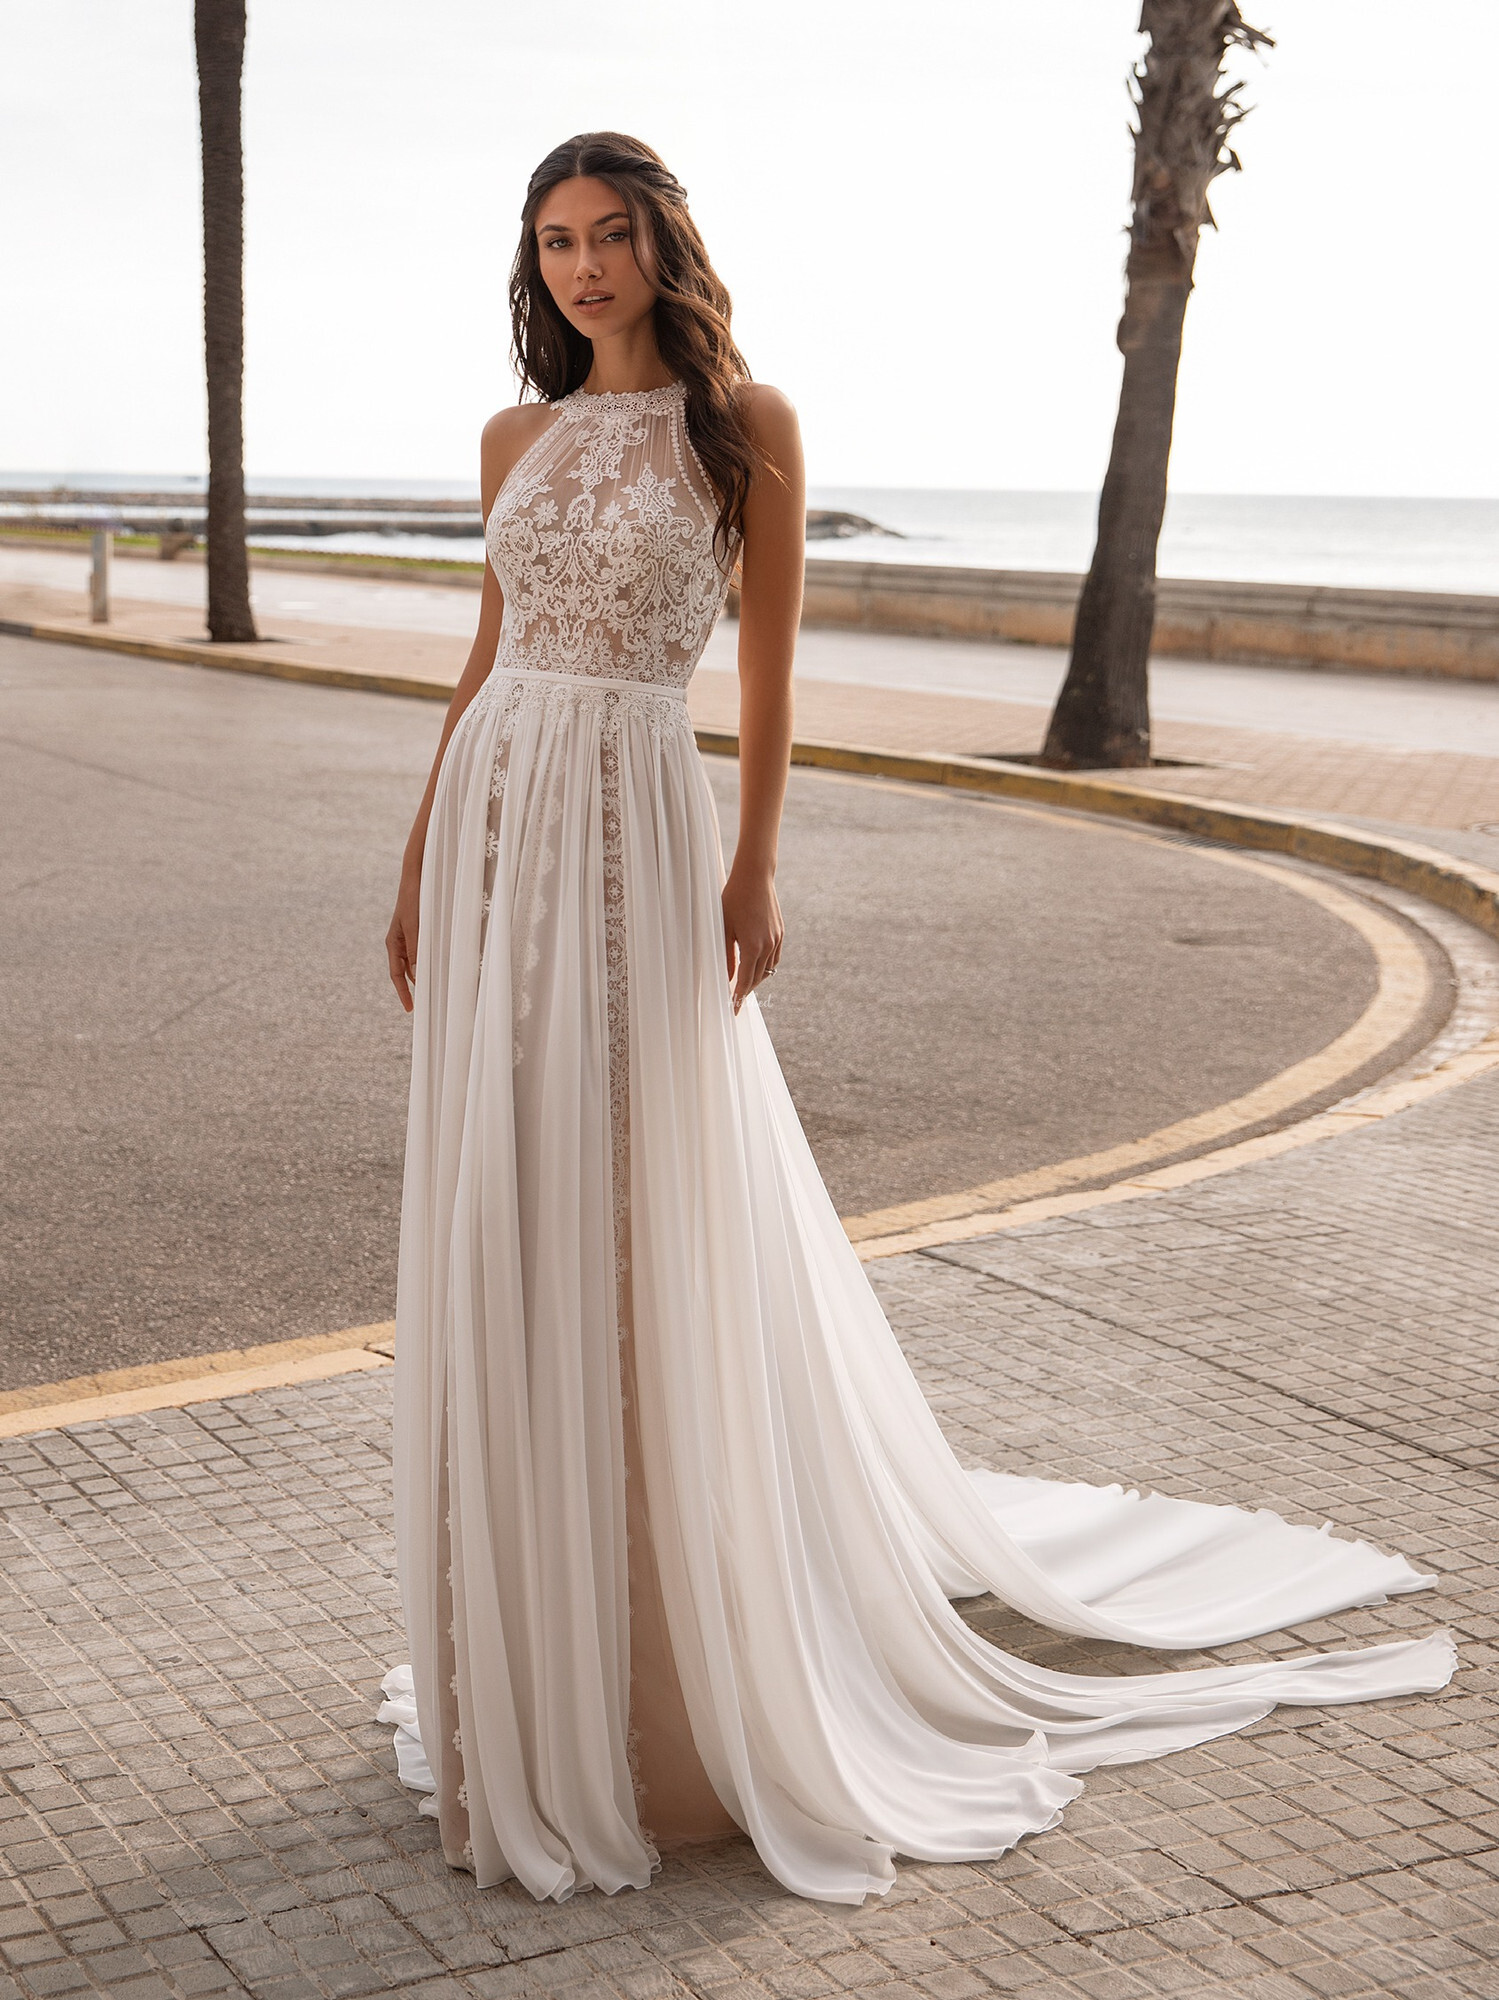 GRANVILLE Wedding Dress from Pronovias - hitched.co.uk